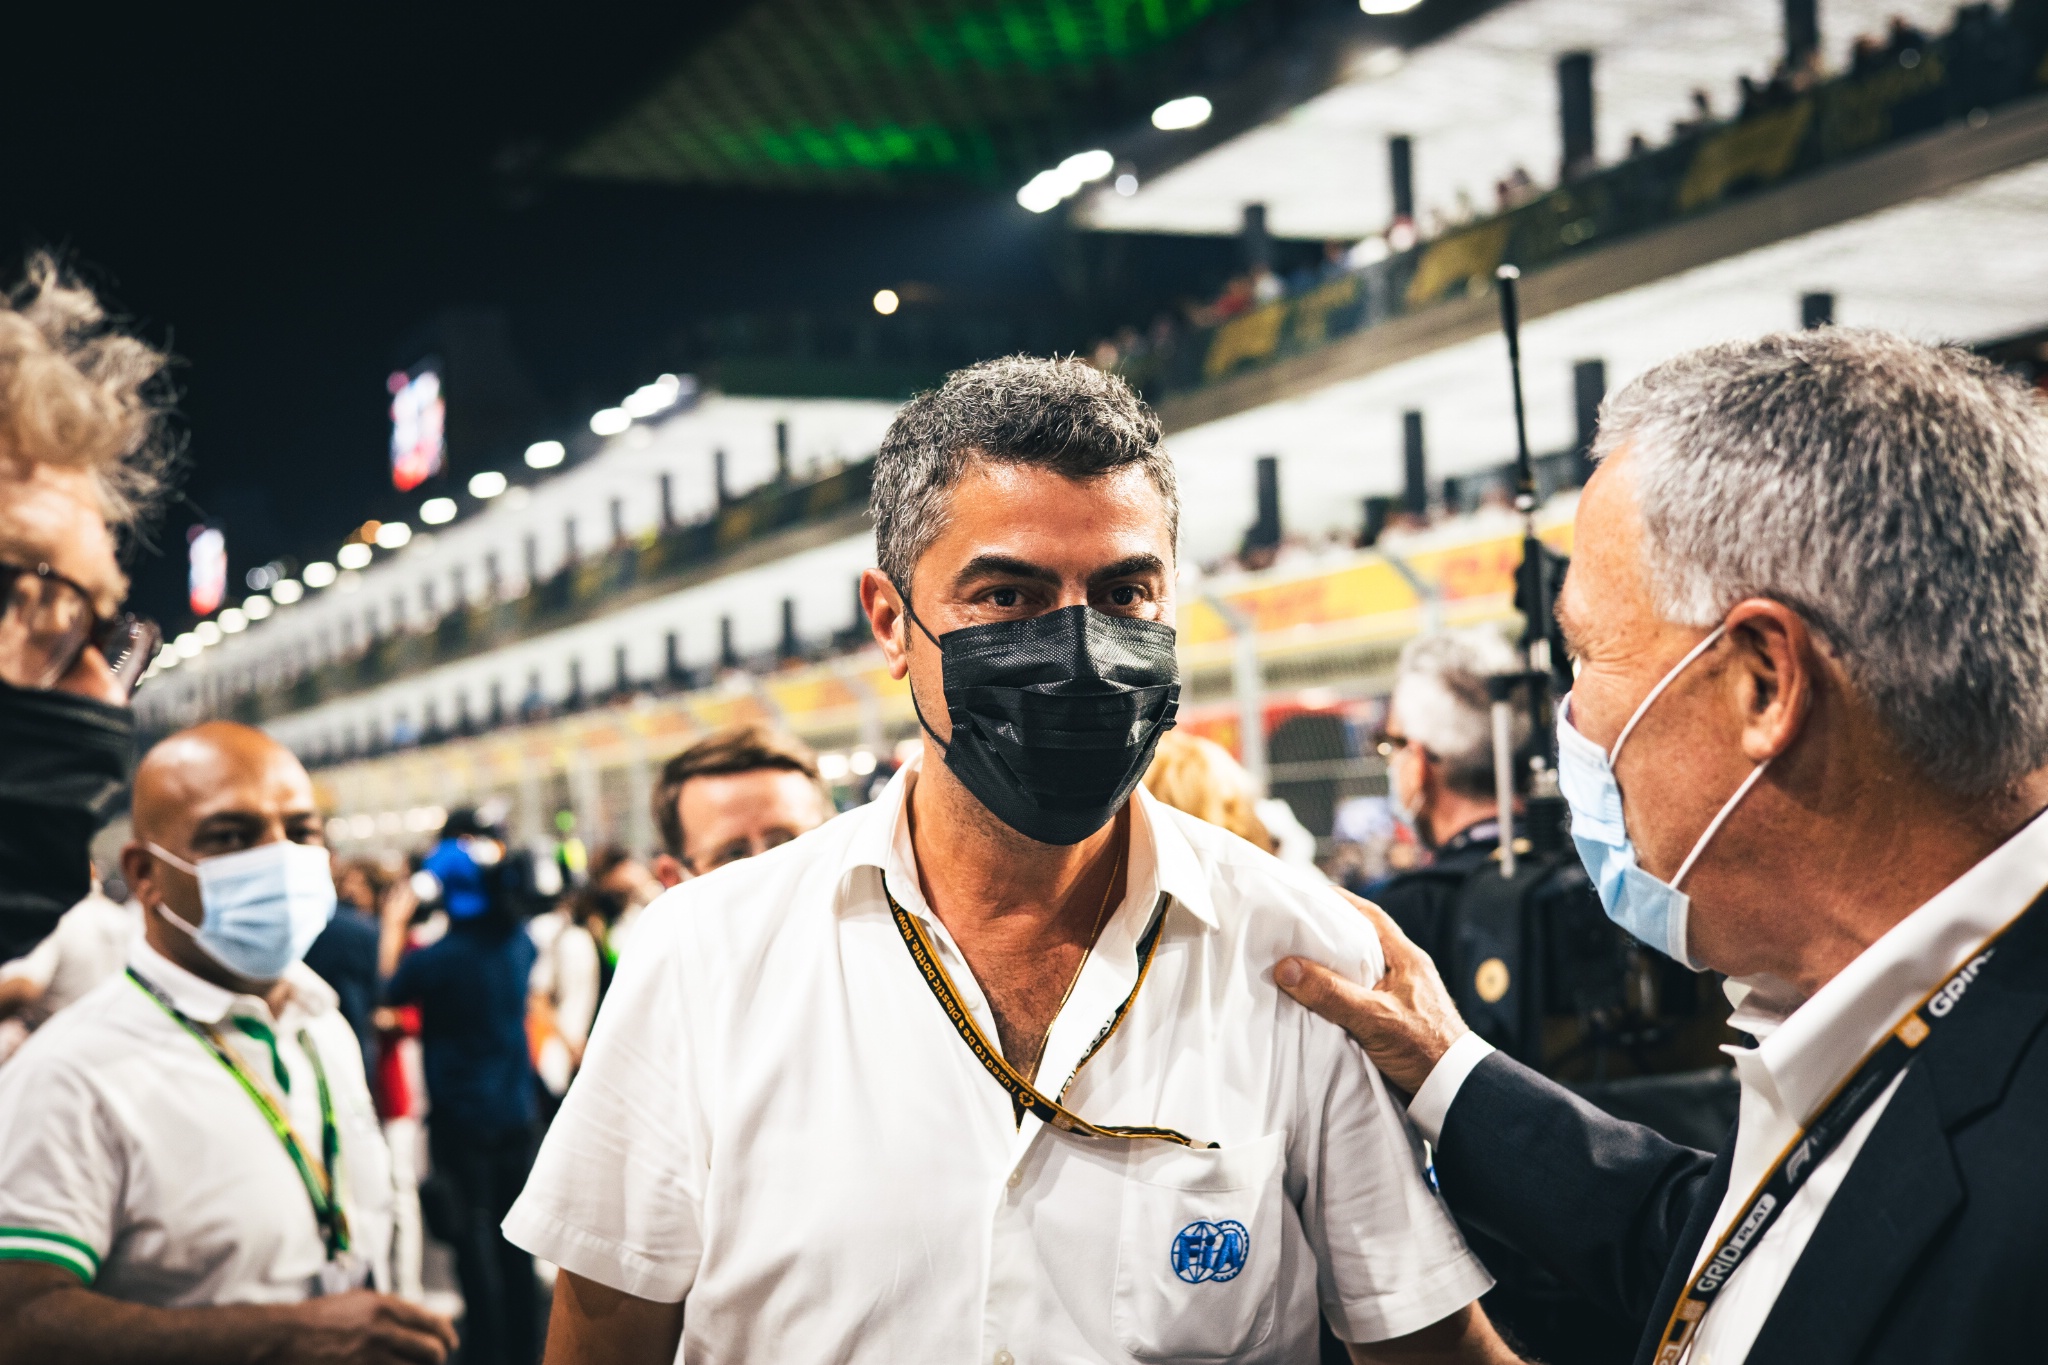 Michael Masi (AUS) FIA Race Director with Chase Carey (USA) on the